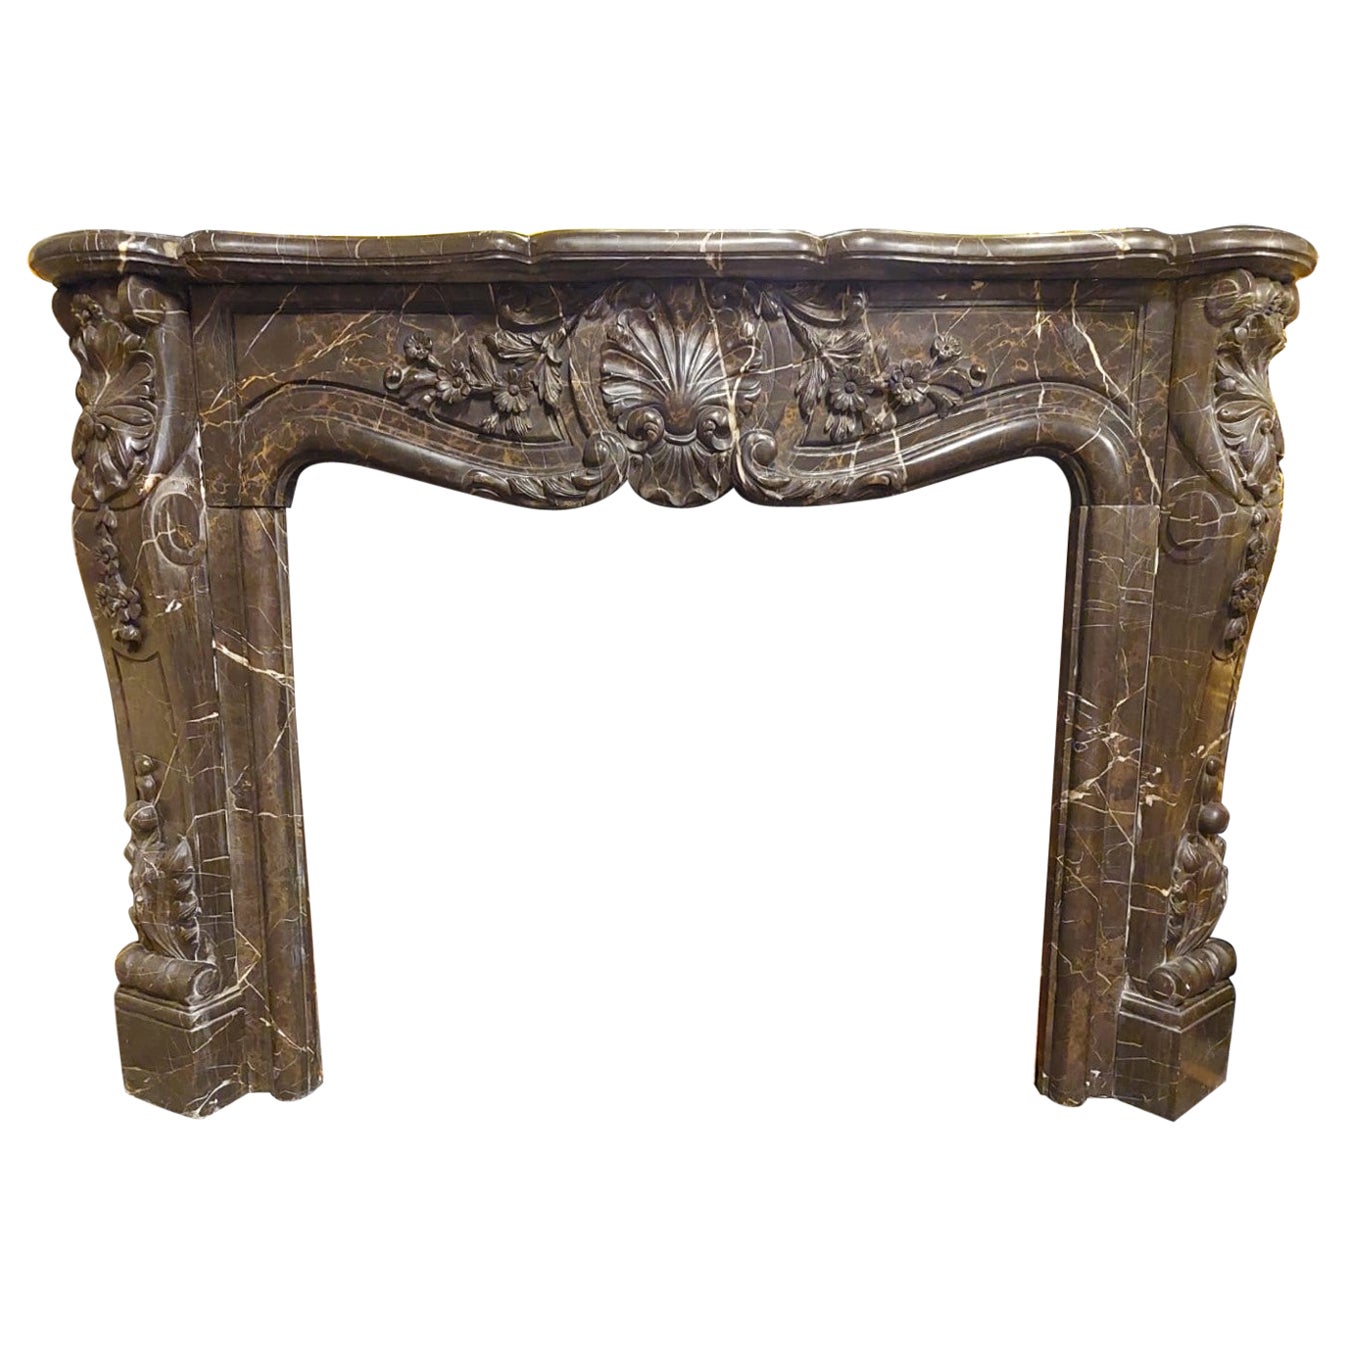 Mantle Fireplace Richly Carved Black Marble, Central Shell, 19th Century, Italy For Sale